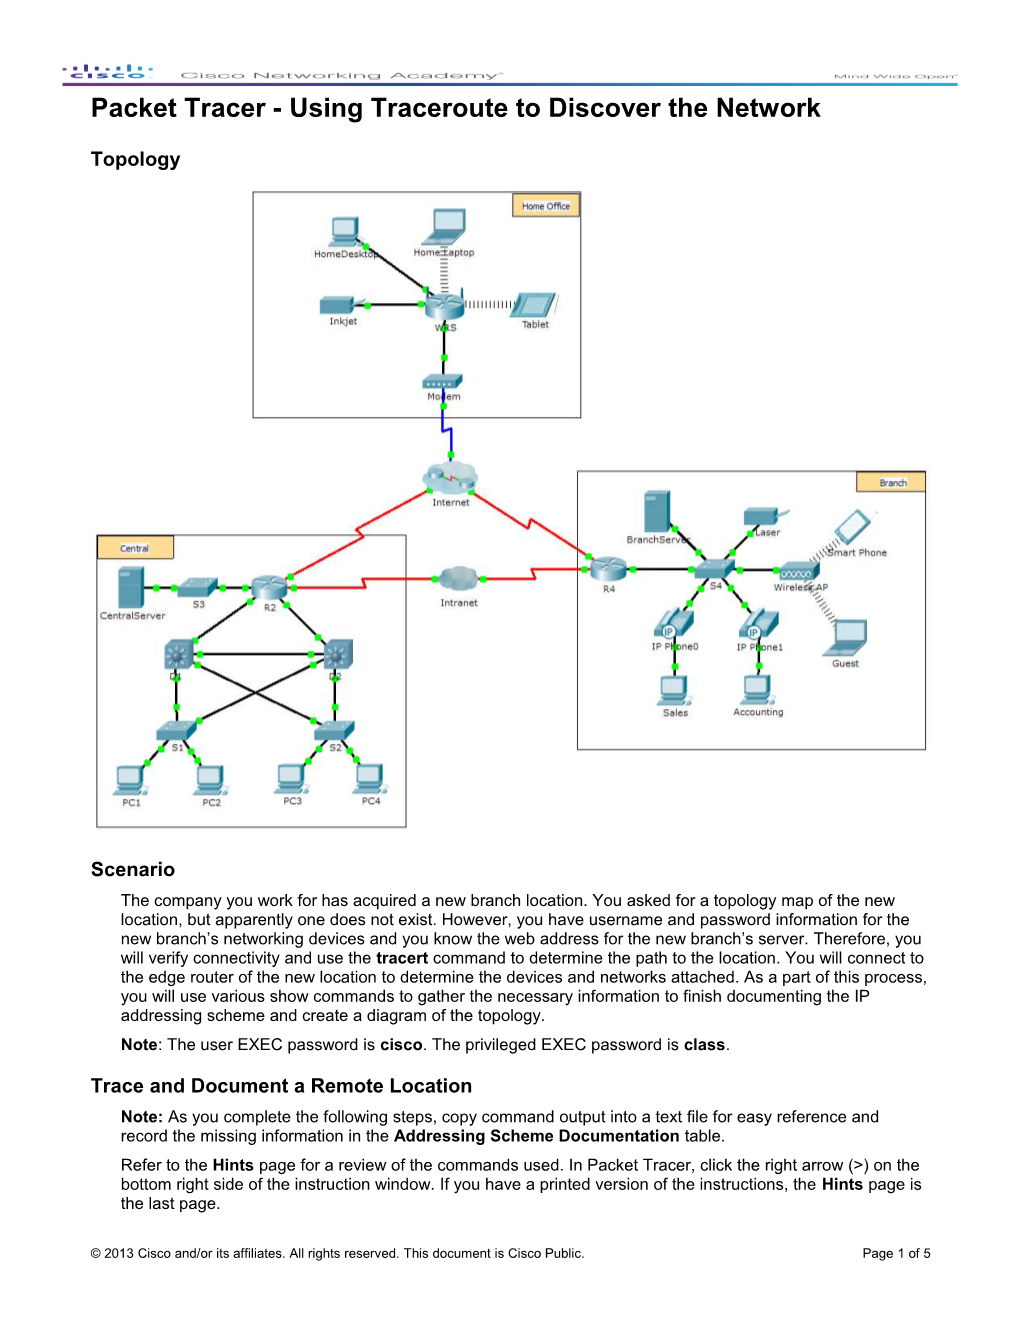 Packet Tracer - Using Traceroute to Discover the Network